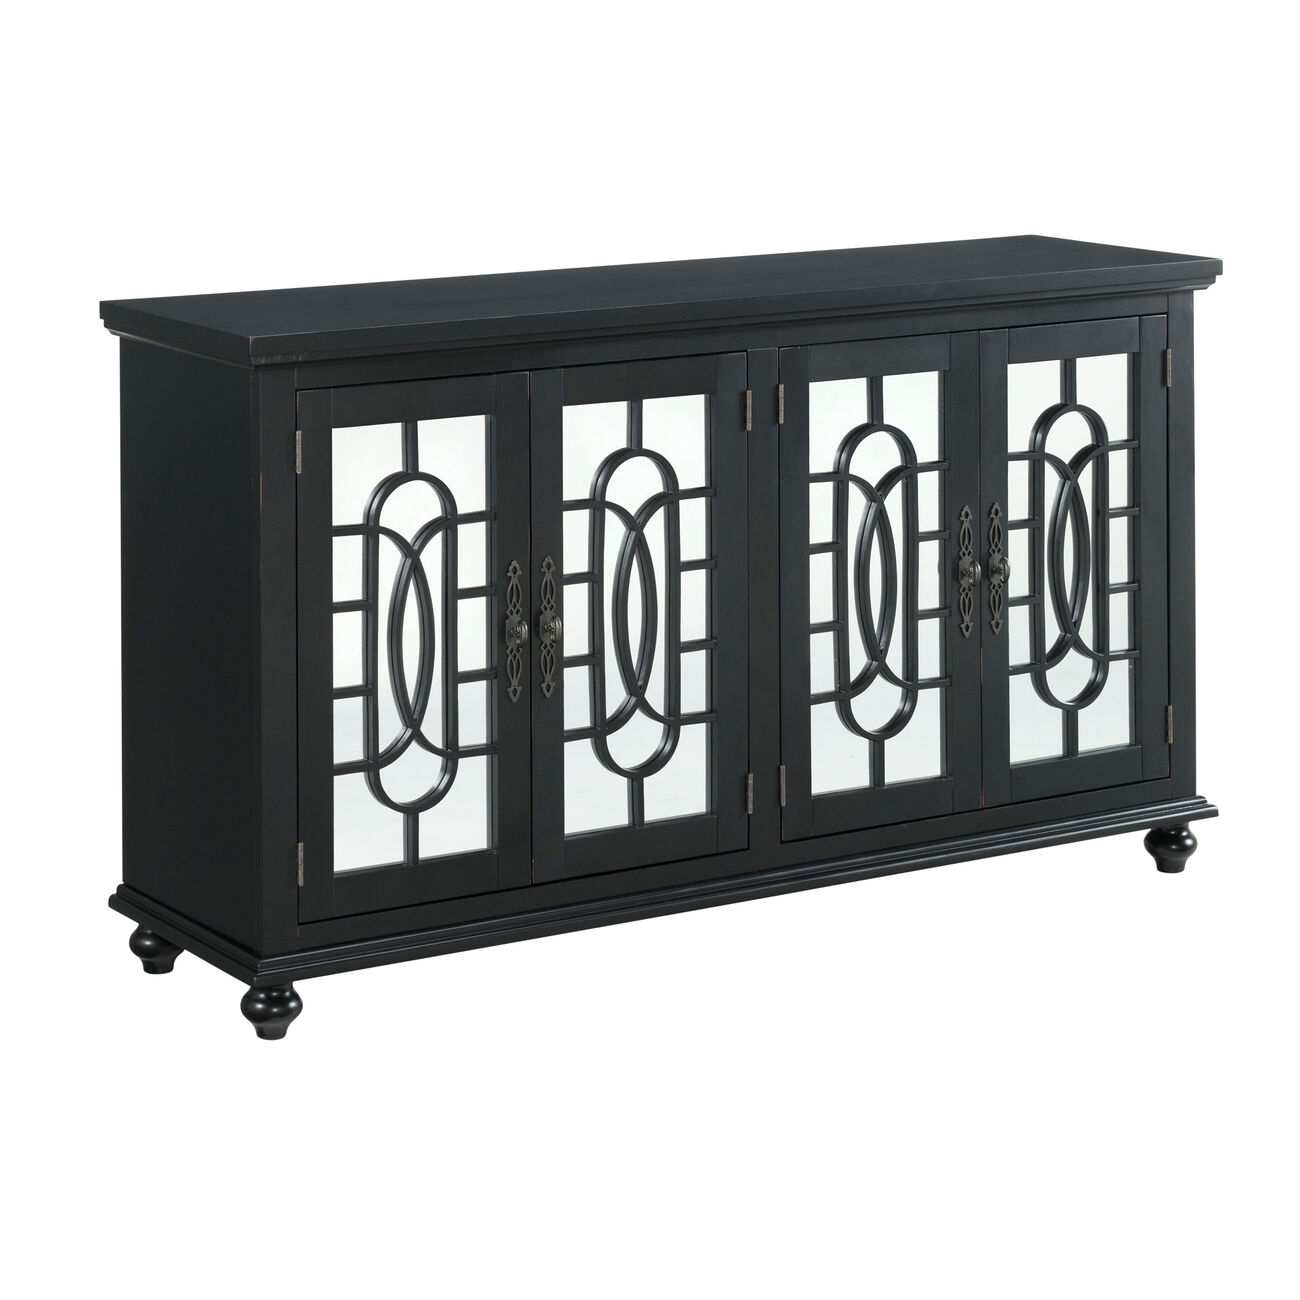 Trellis Front Wood and Glass TV stand with Cabinet Storage, Black